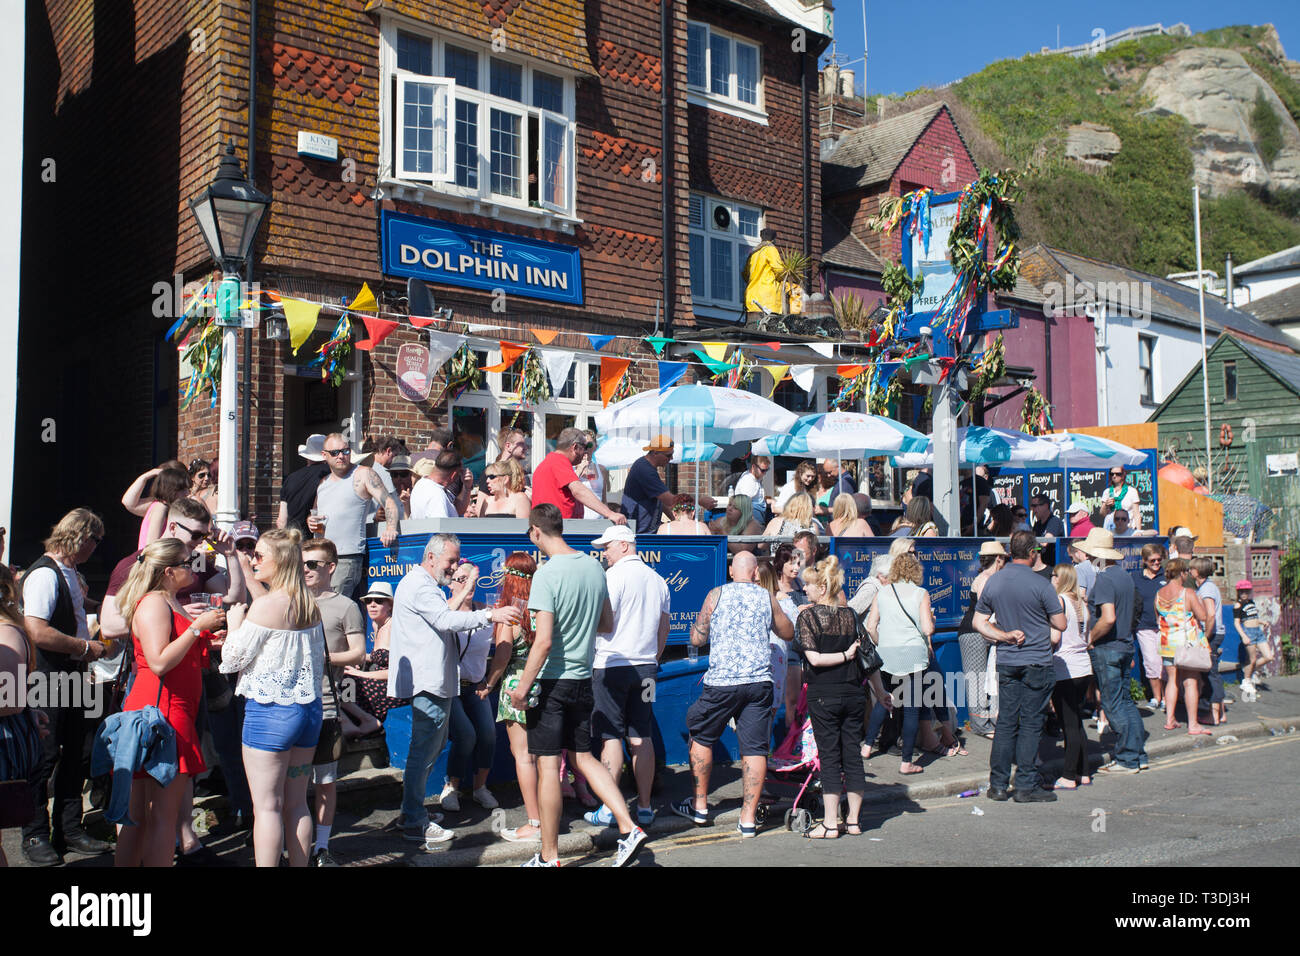 Revellers drinking outside the Dolphin Inn pub on a sunny day during Jack on the Green May Day Bank Holiday, Hastings, East Sussex, Uk Stock Photo